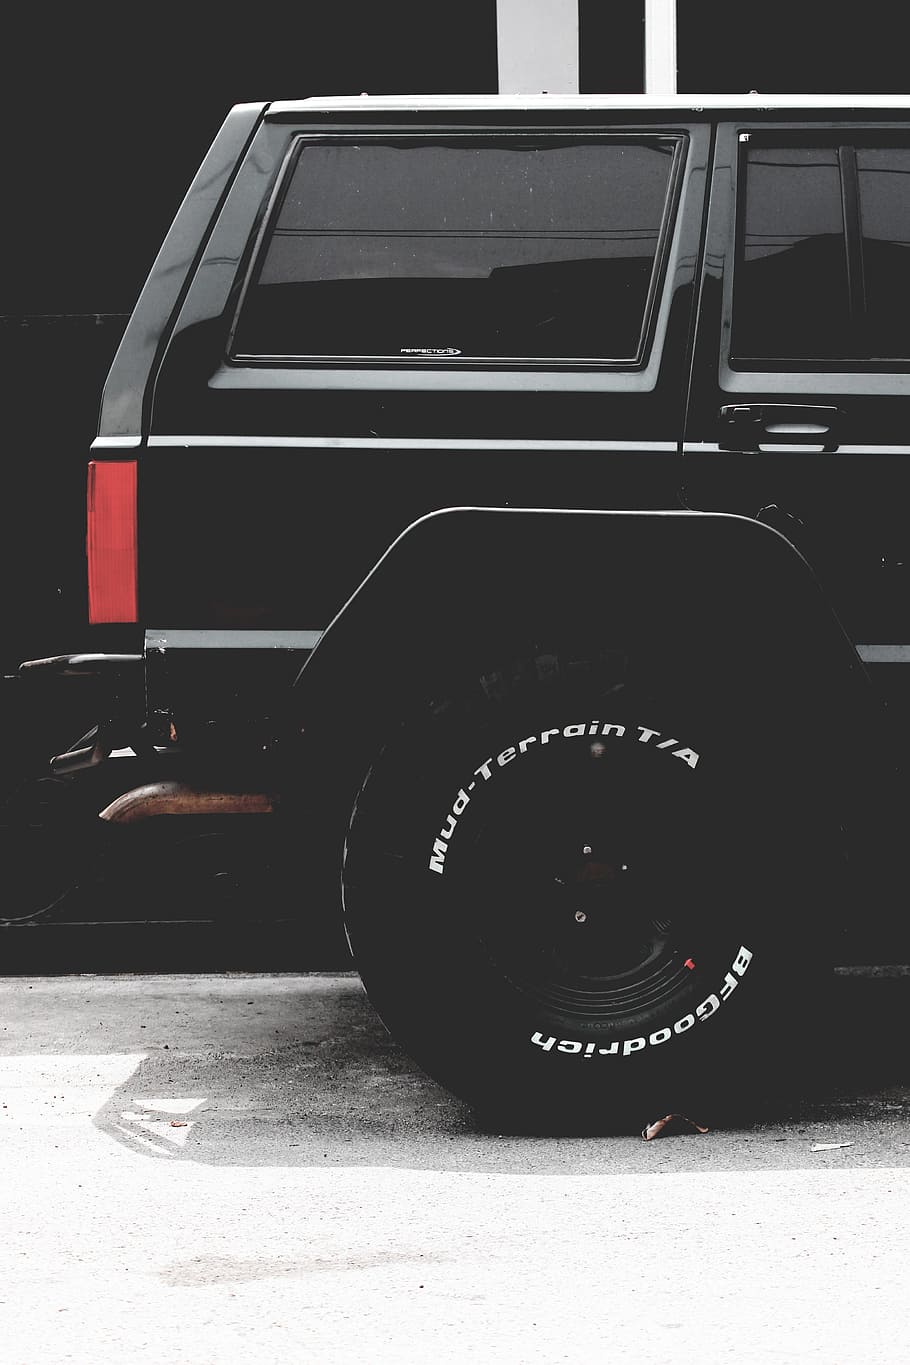 black SUV parked by wall, car, offroad, canonphoto, jeep', hypebeast